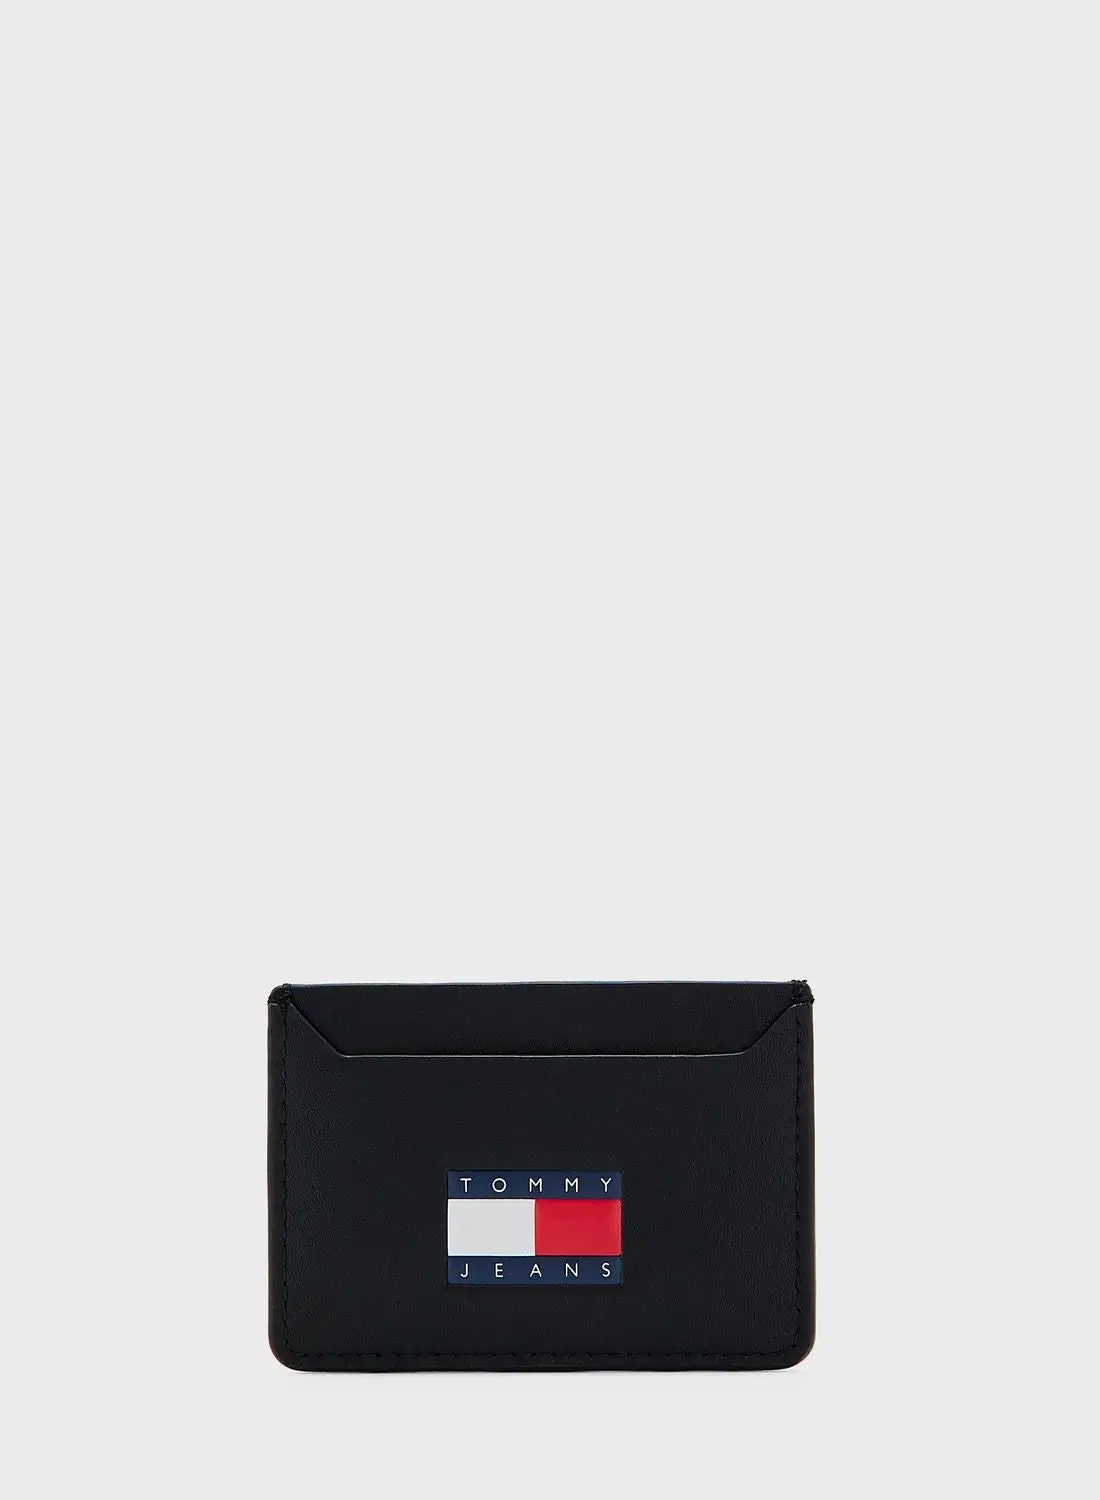 TOMMY JEANS Heritage Leather Card Holder